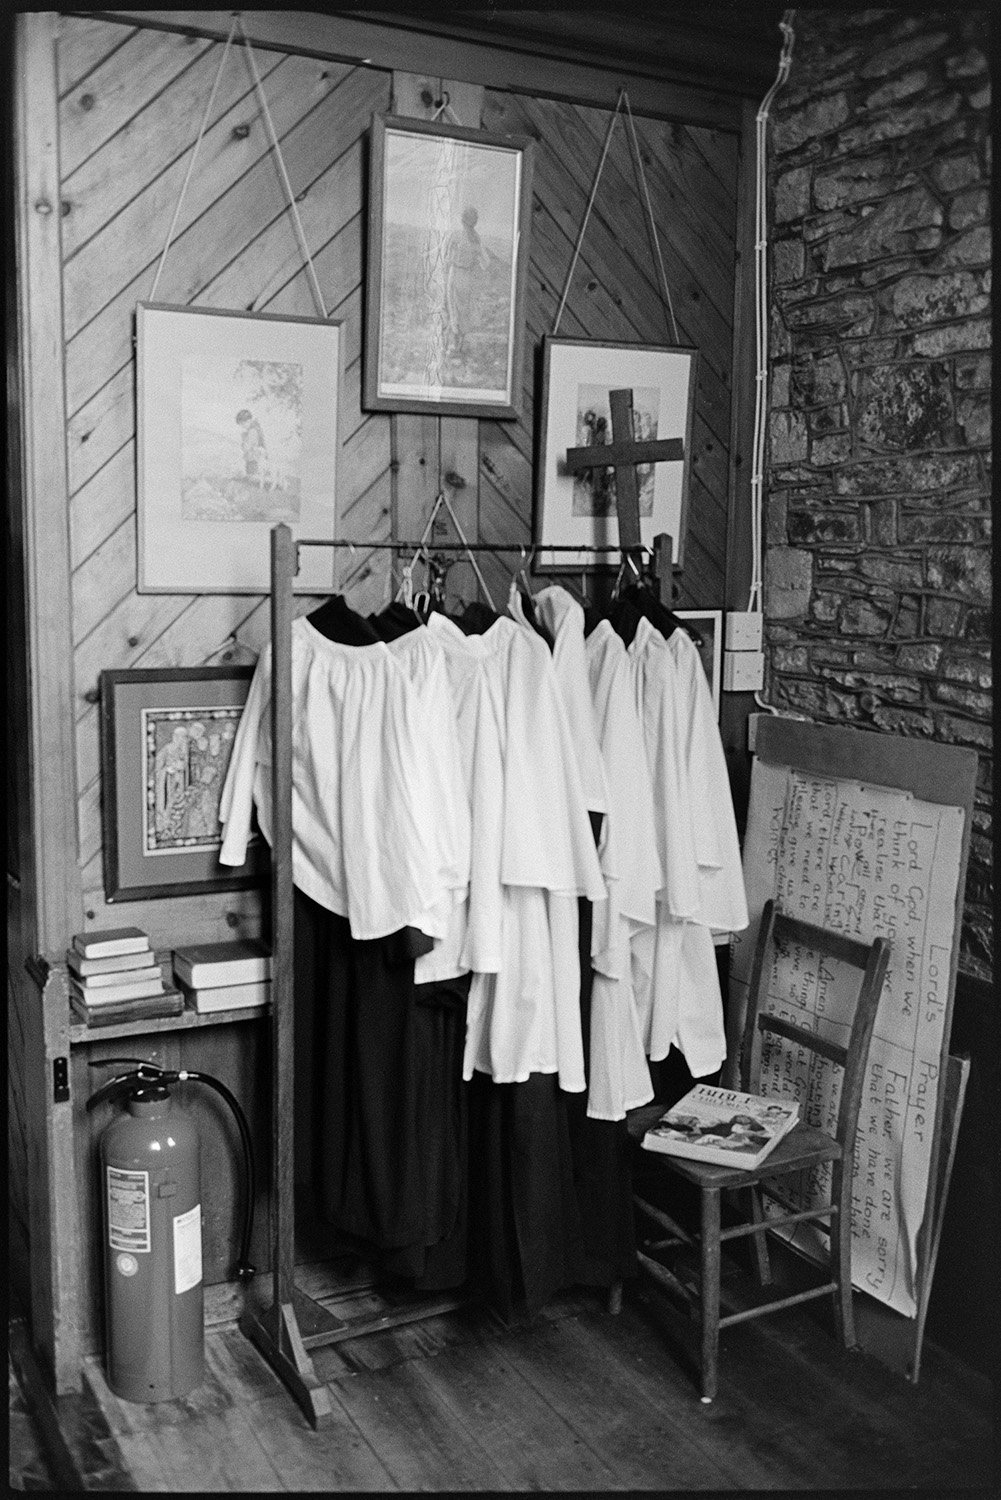 Clergy or choir robes hung on a rail in a church vestry. Also shown is a fire extinguisher, a chair, books, a pin board, a wooden cross, and pictures hanging on a wood panelled wall.